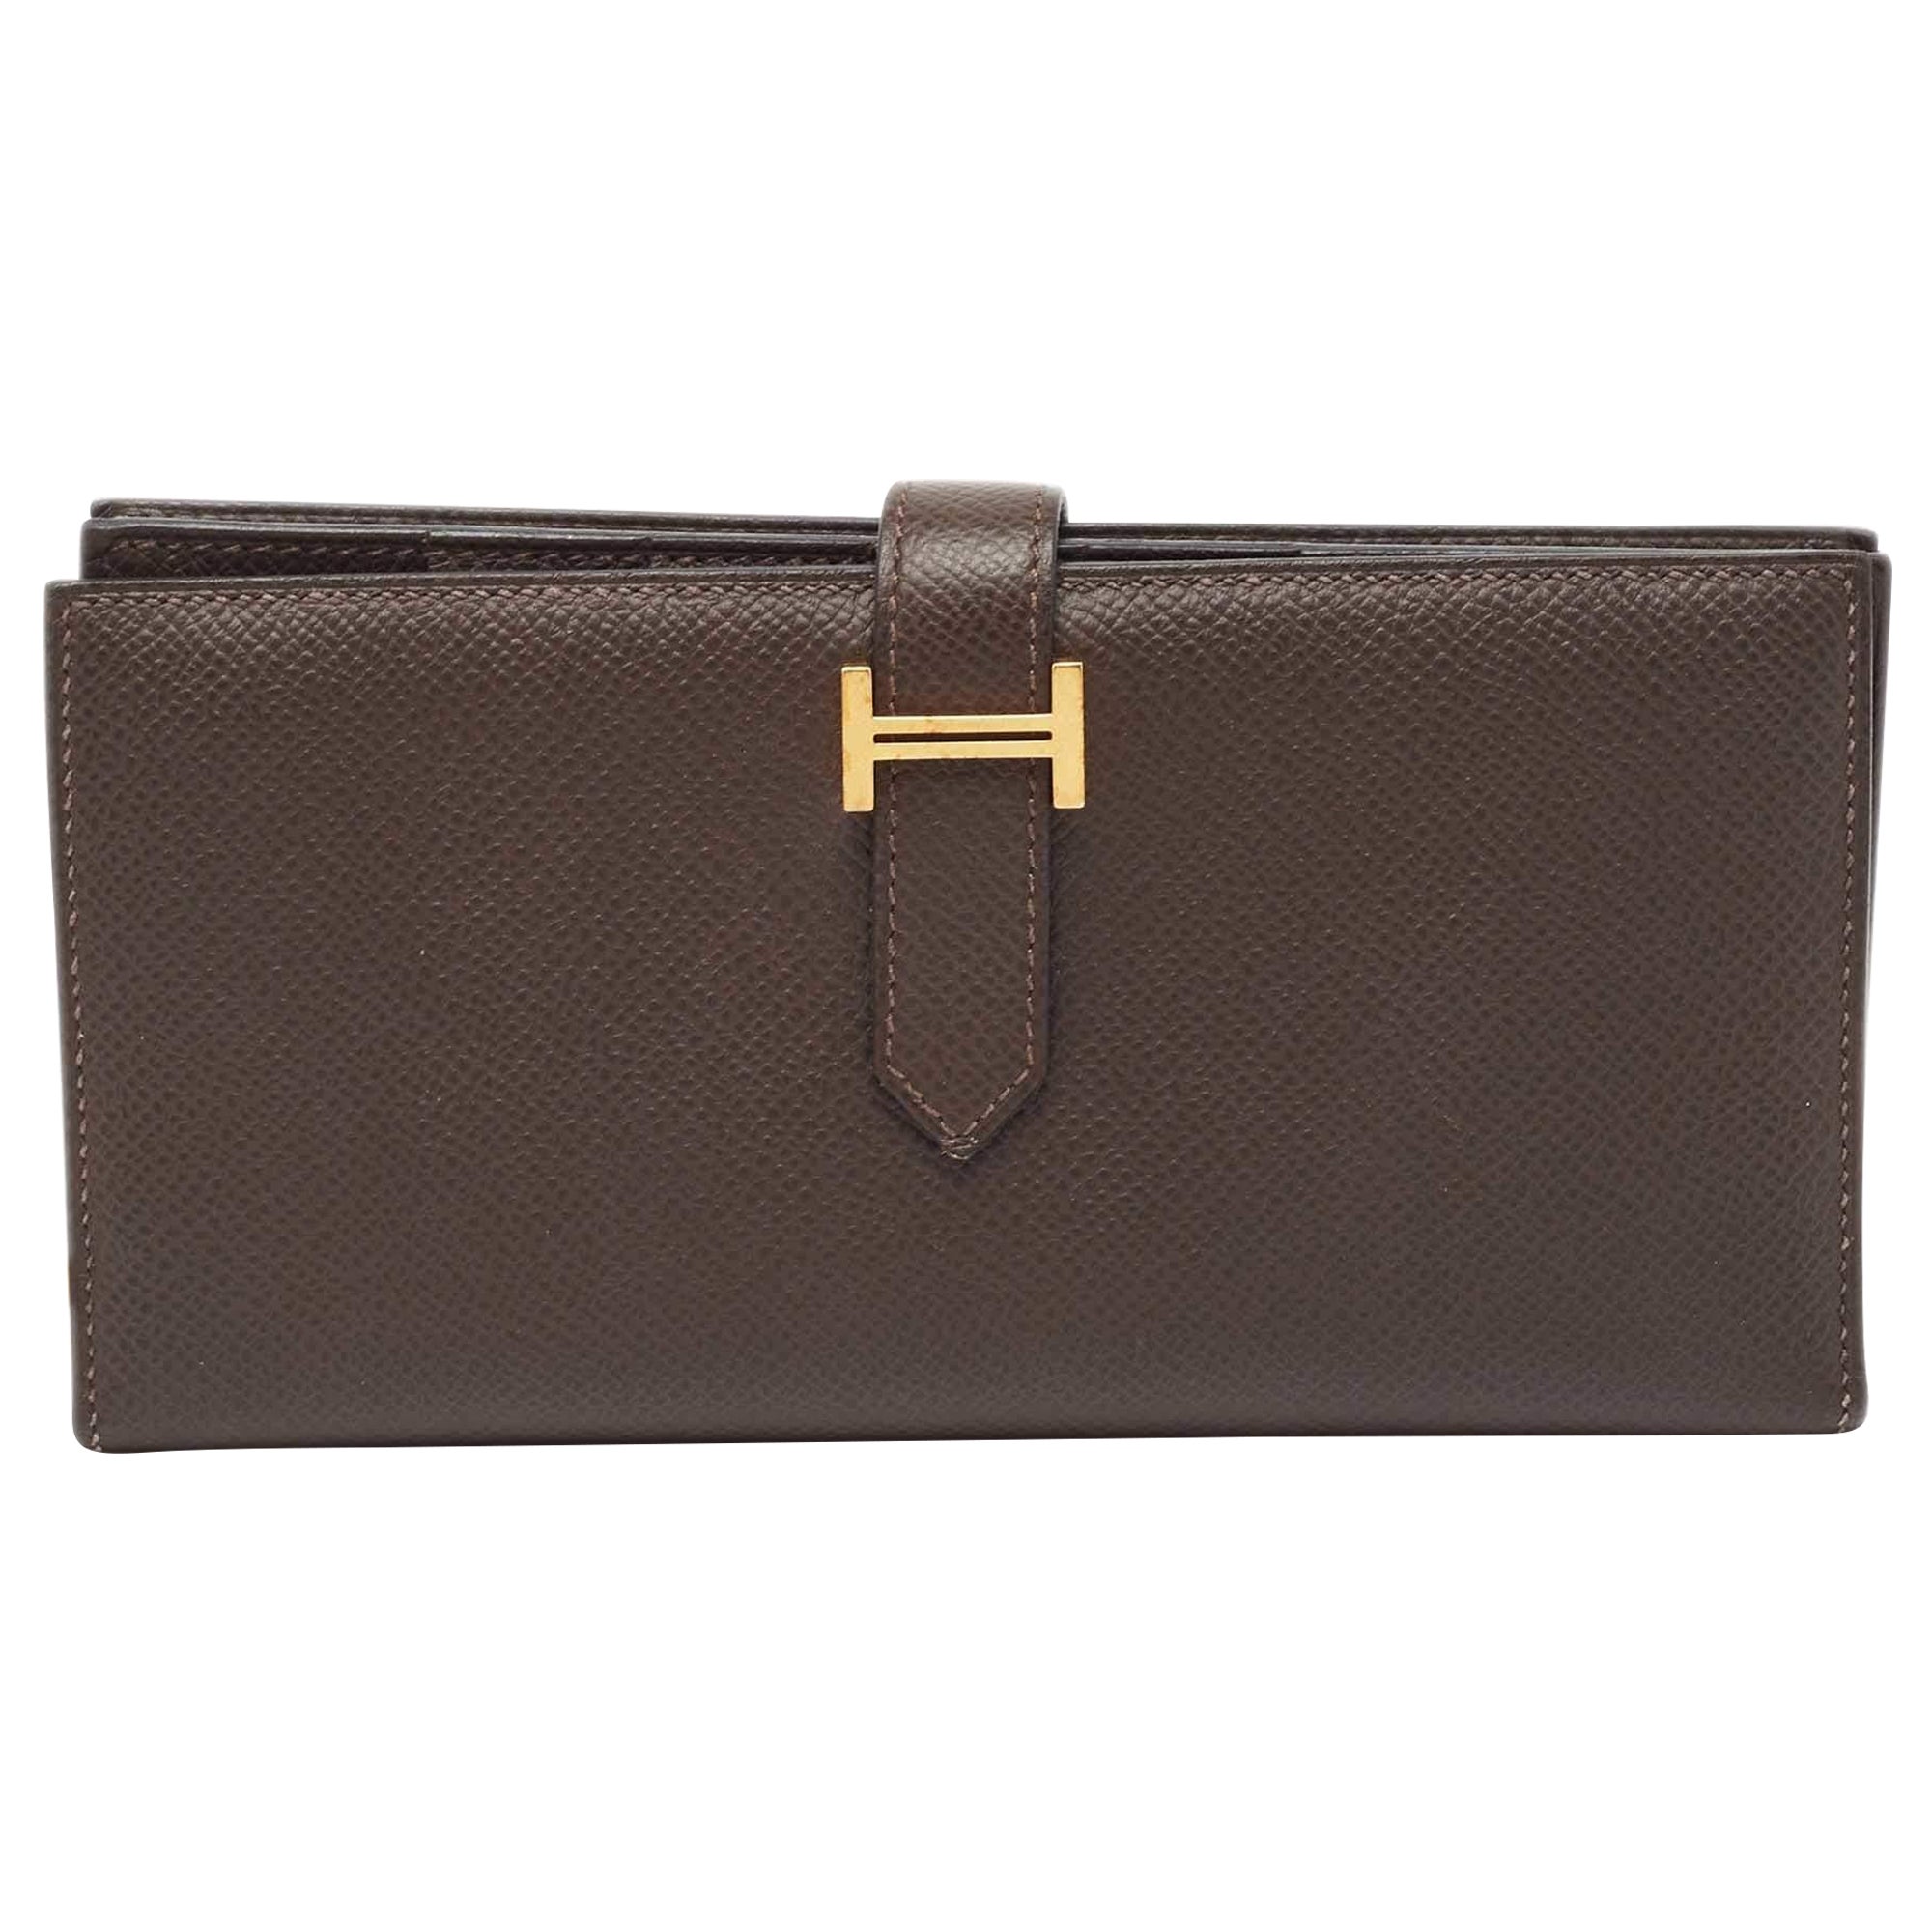 Hermés Chocolat Epsom Leather Bearn Gusset Wallet For Sale